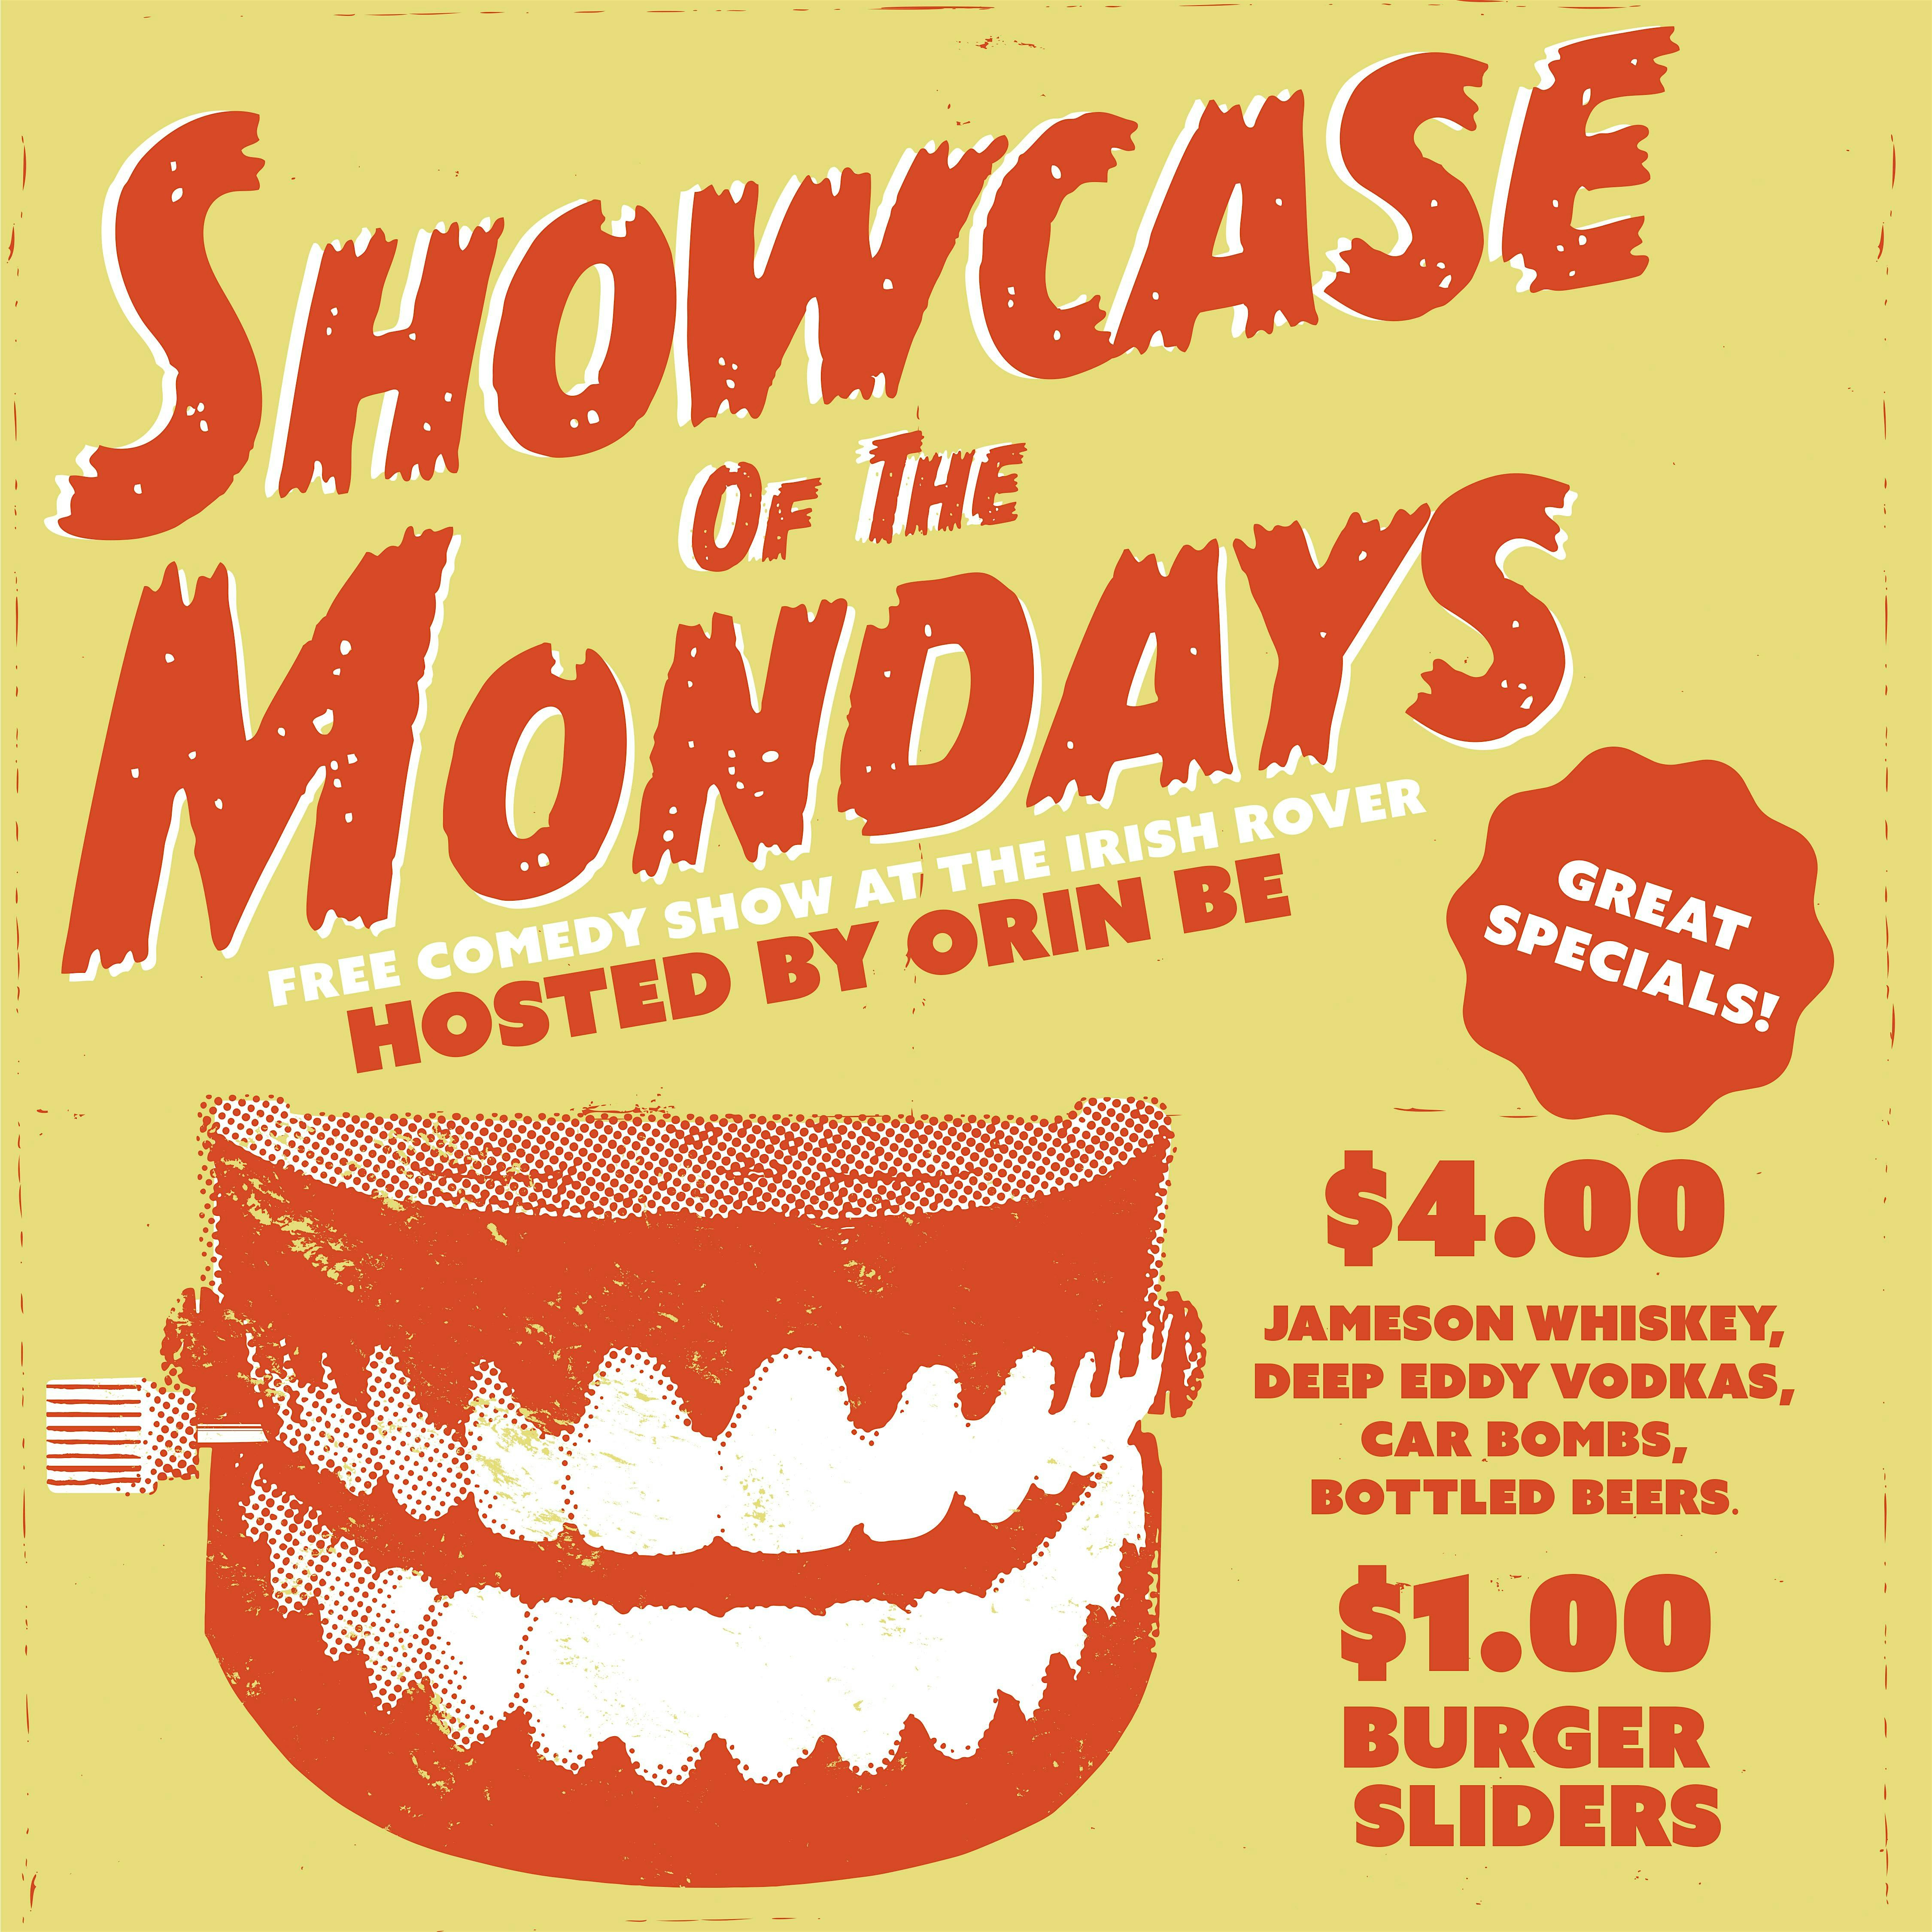 Showcase of the Mondays! Free Comedy Show at the Irish Rover